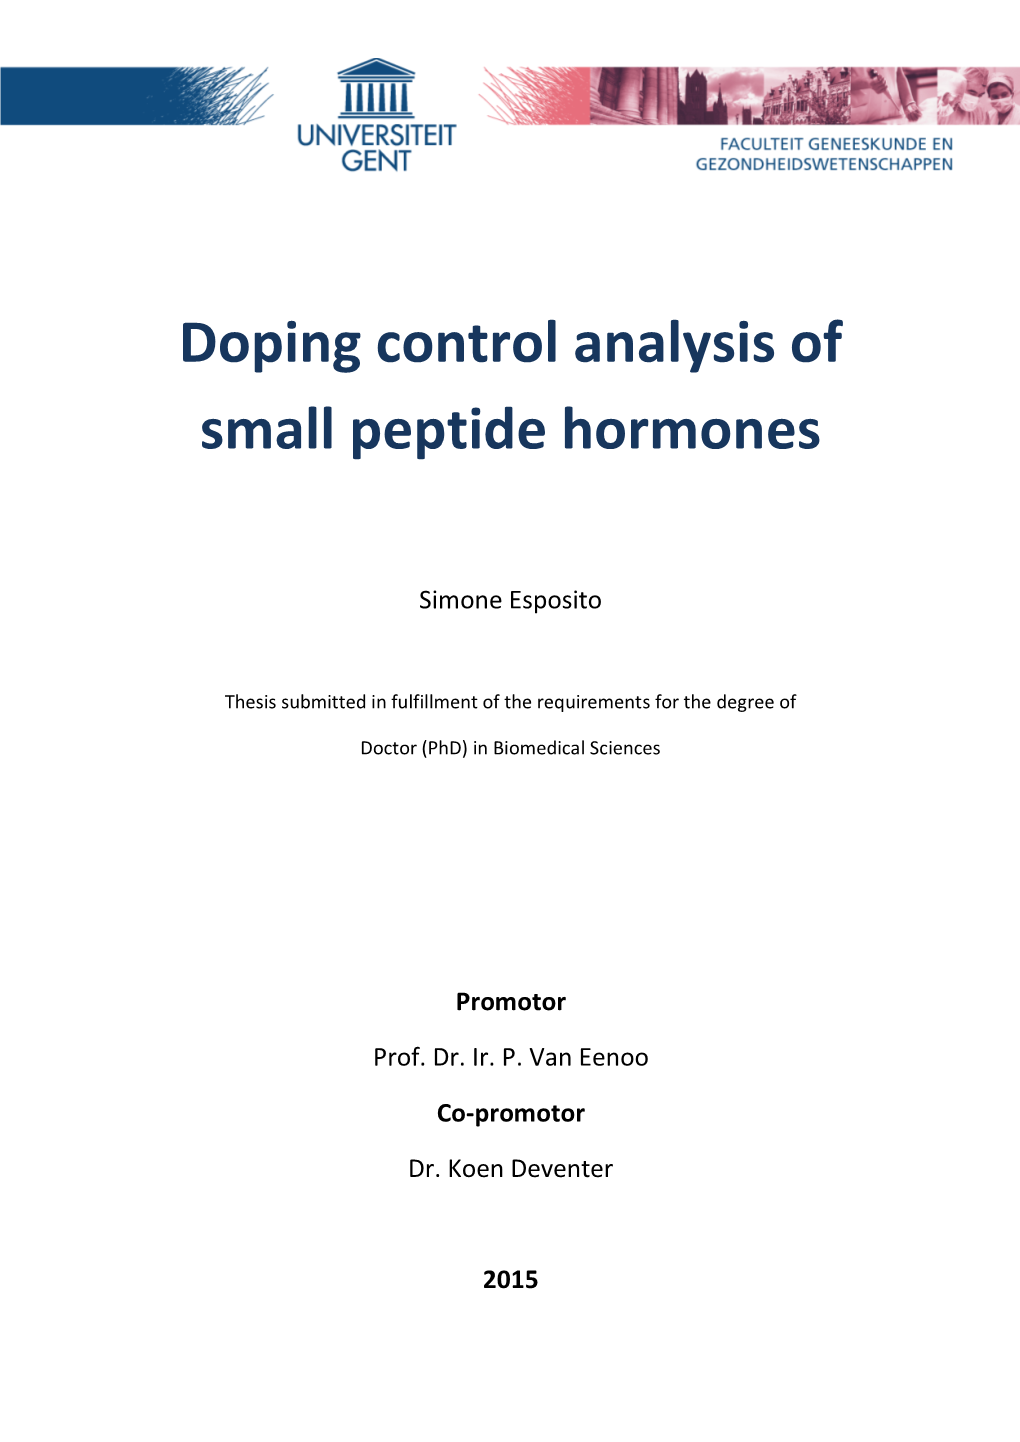 Doping Control Analysis of Small Peptide Hormones